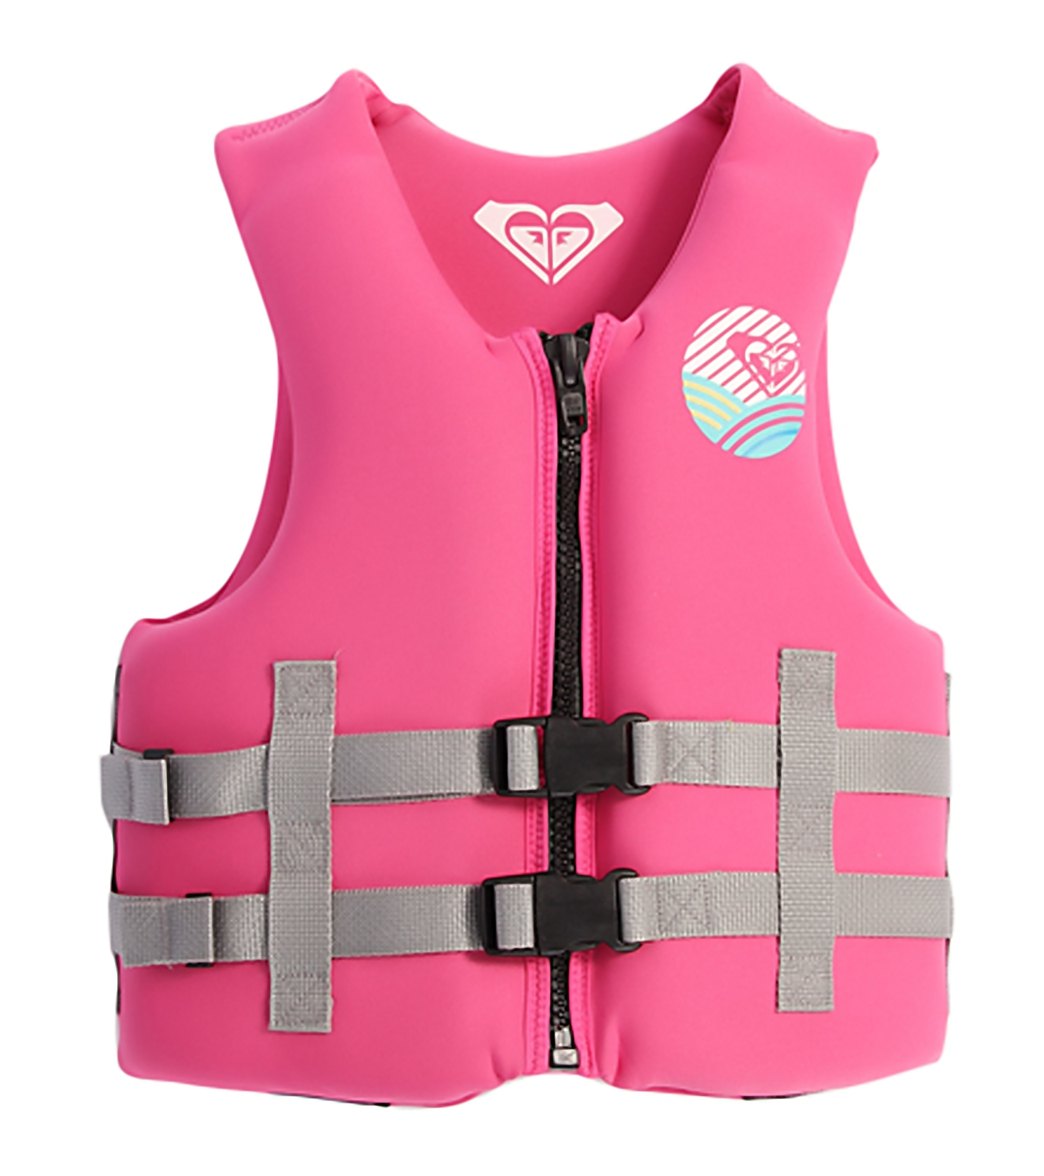 Roxy Youth/Child Dreams Syncro USCG Life Vest at SwimOutlet.com